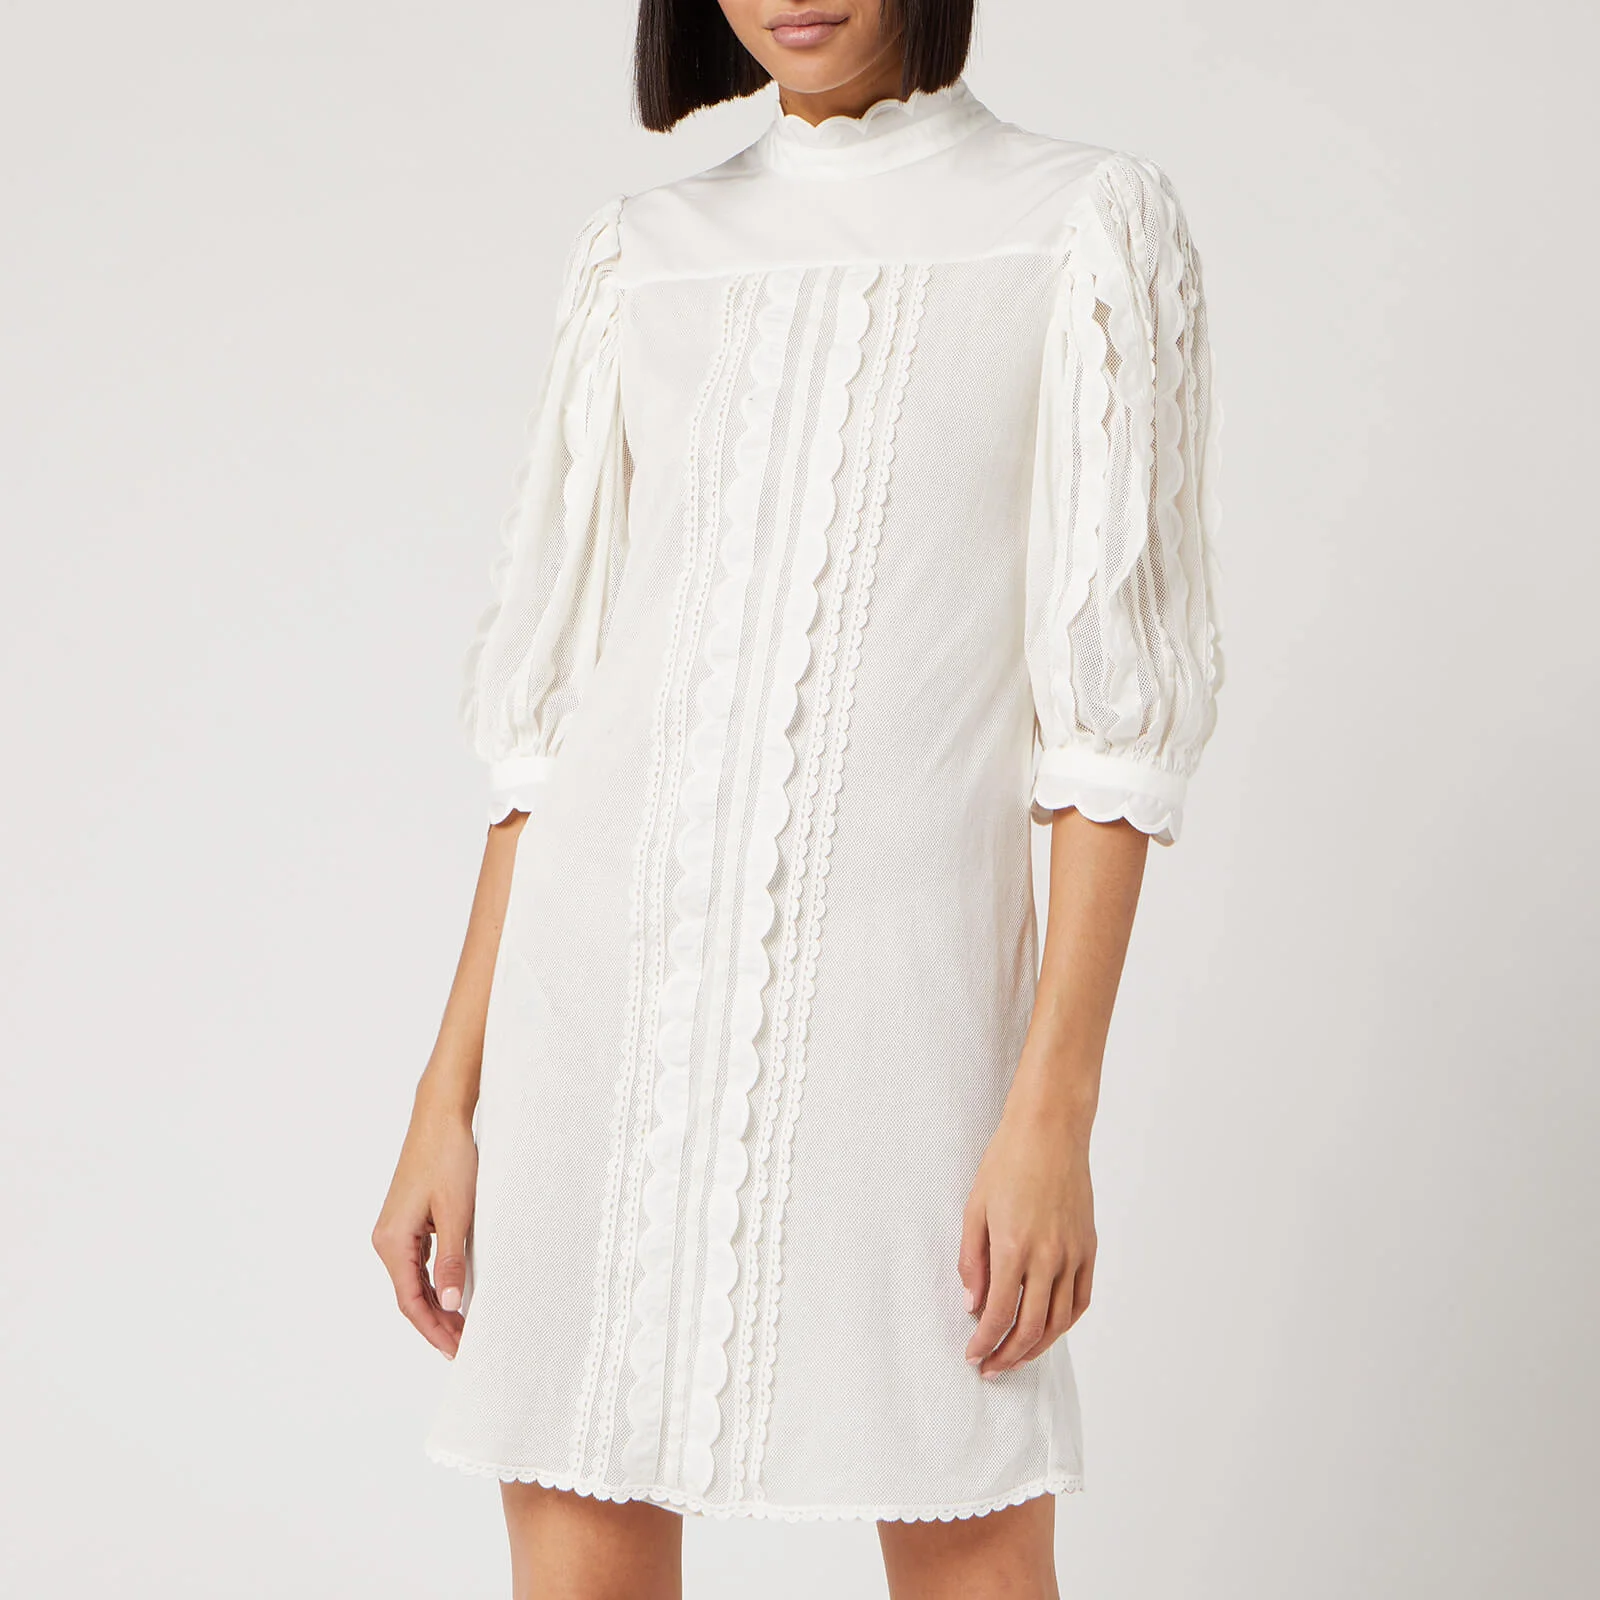 See By Chloé Women's Embroidered Dress - Iconic Milk Image 1